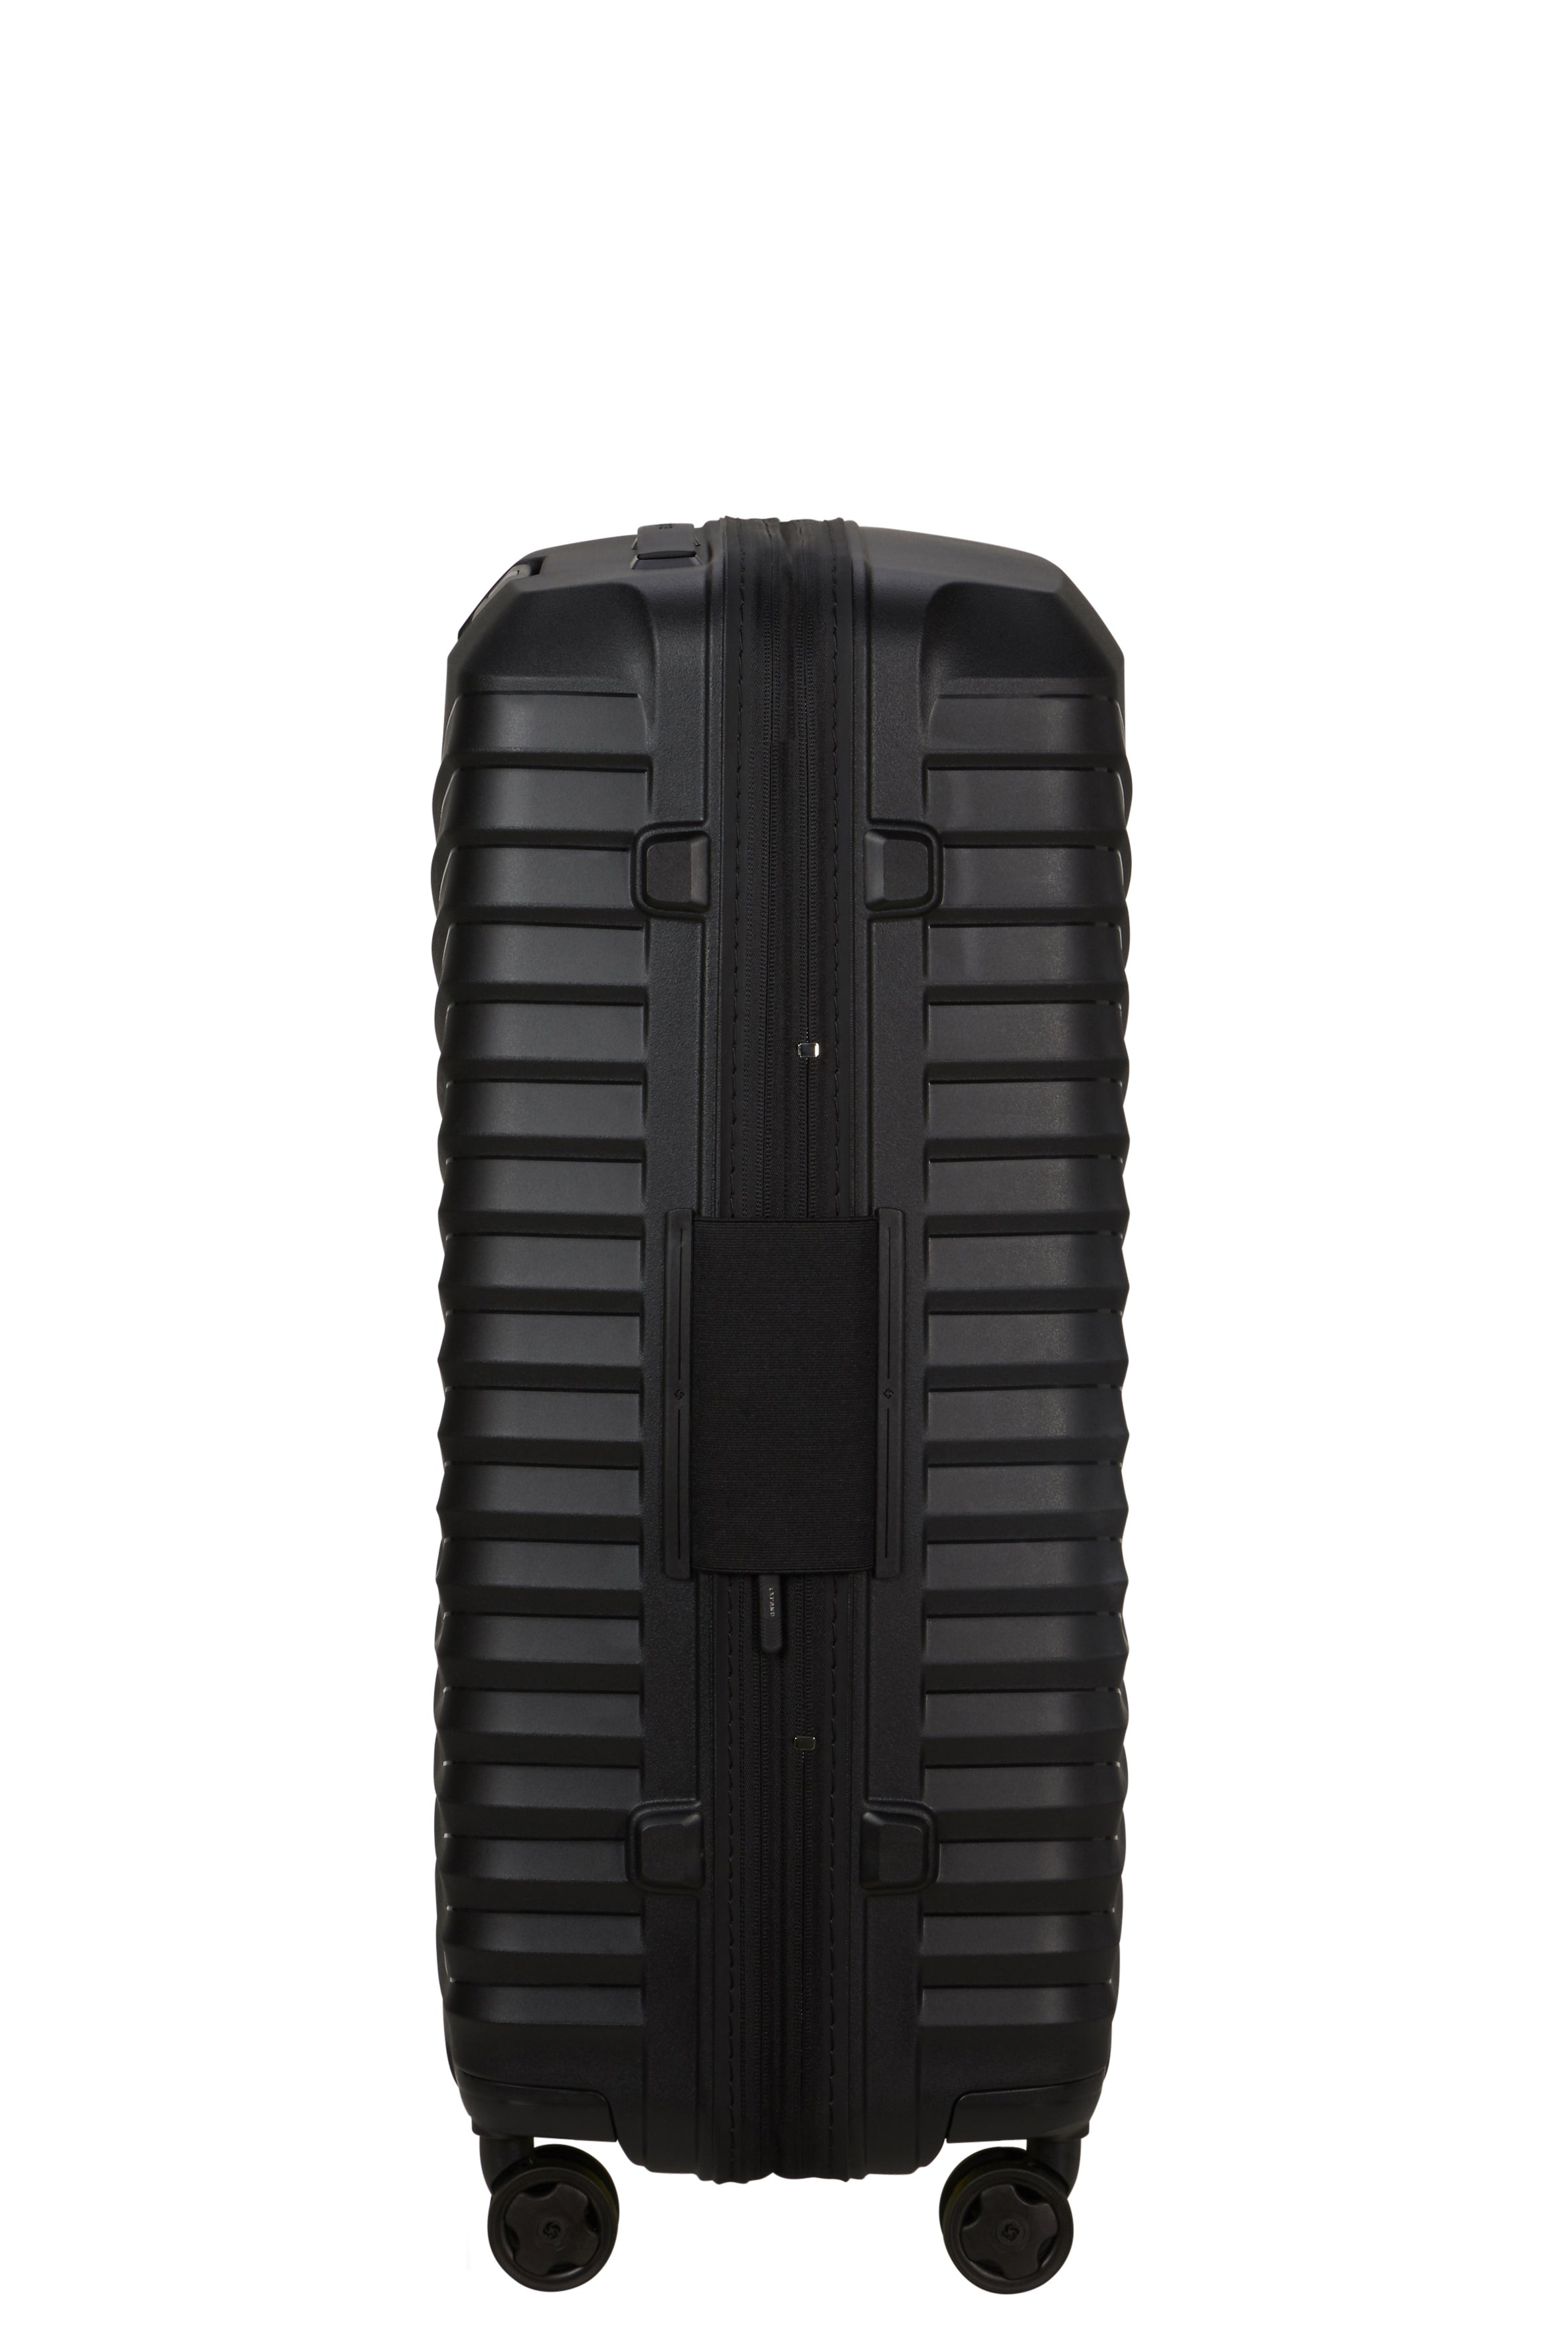 Samsonite Intuo 69cm Expandable Spinner